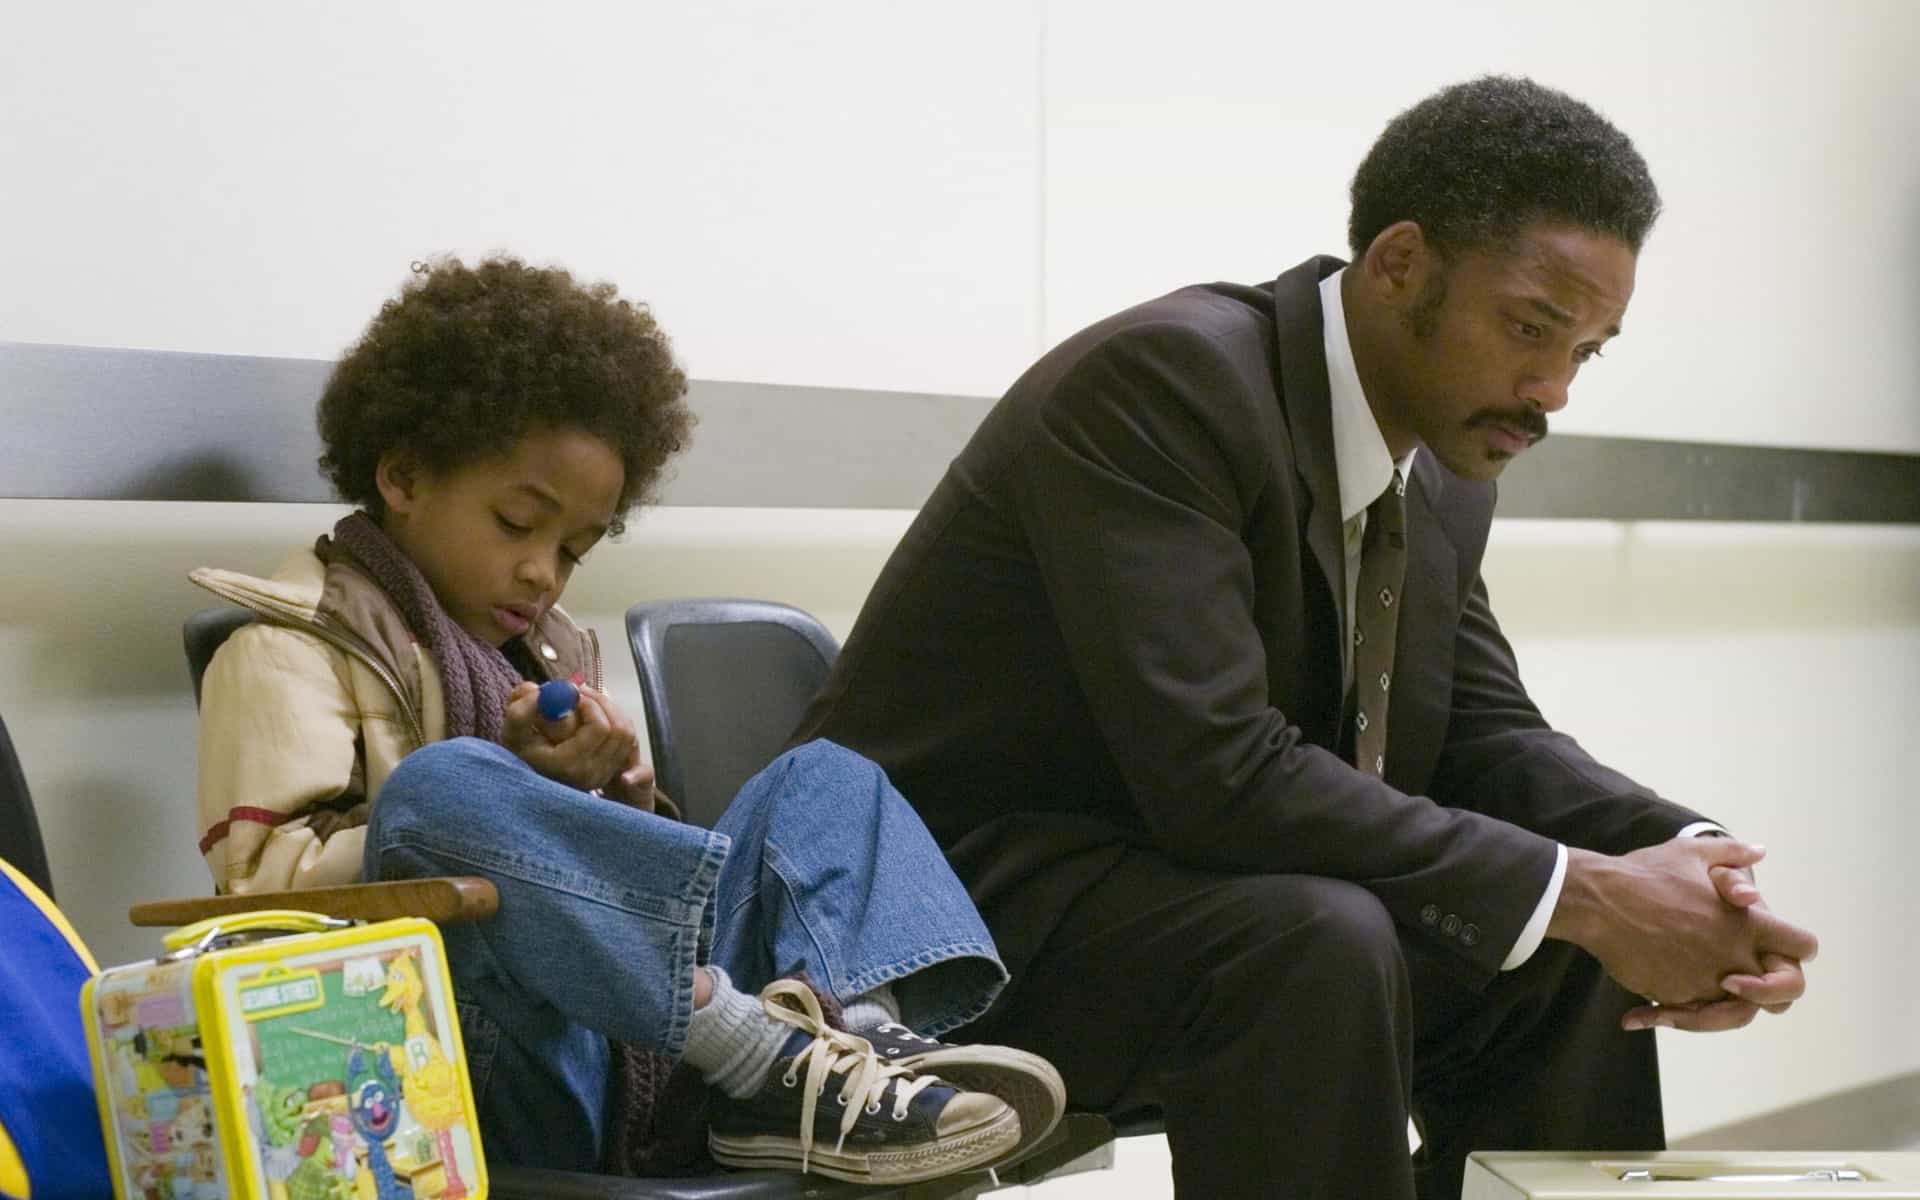 Best Movies based on true stories: The Pursuit of Happyness